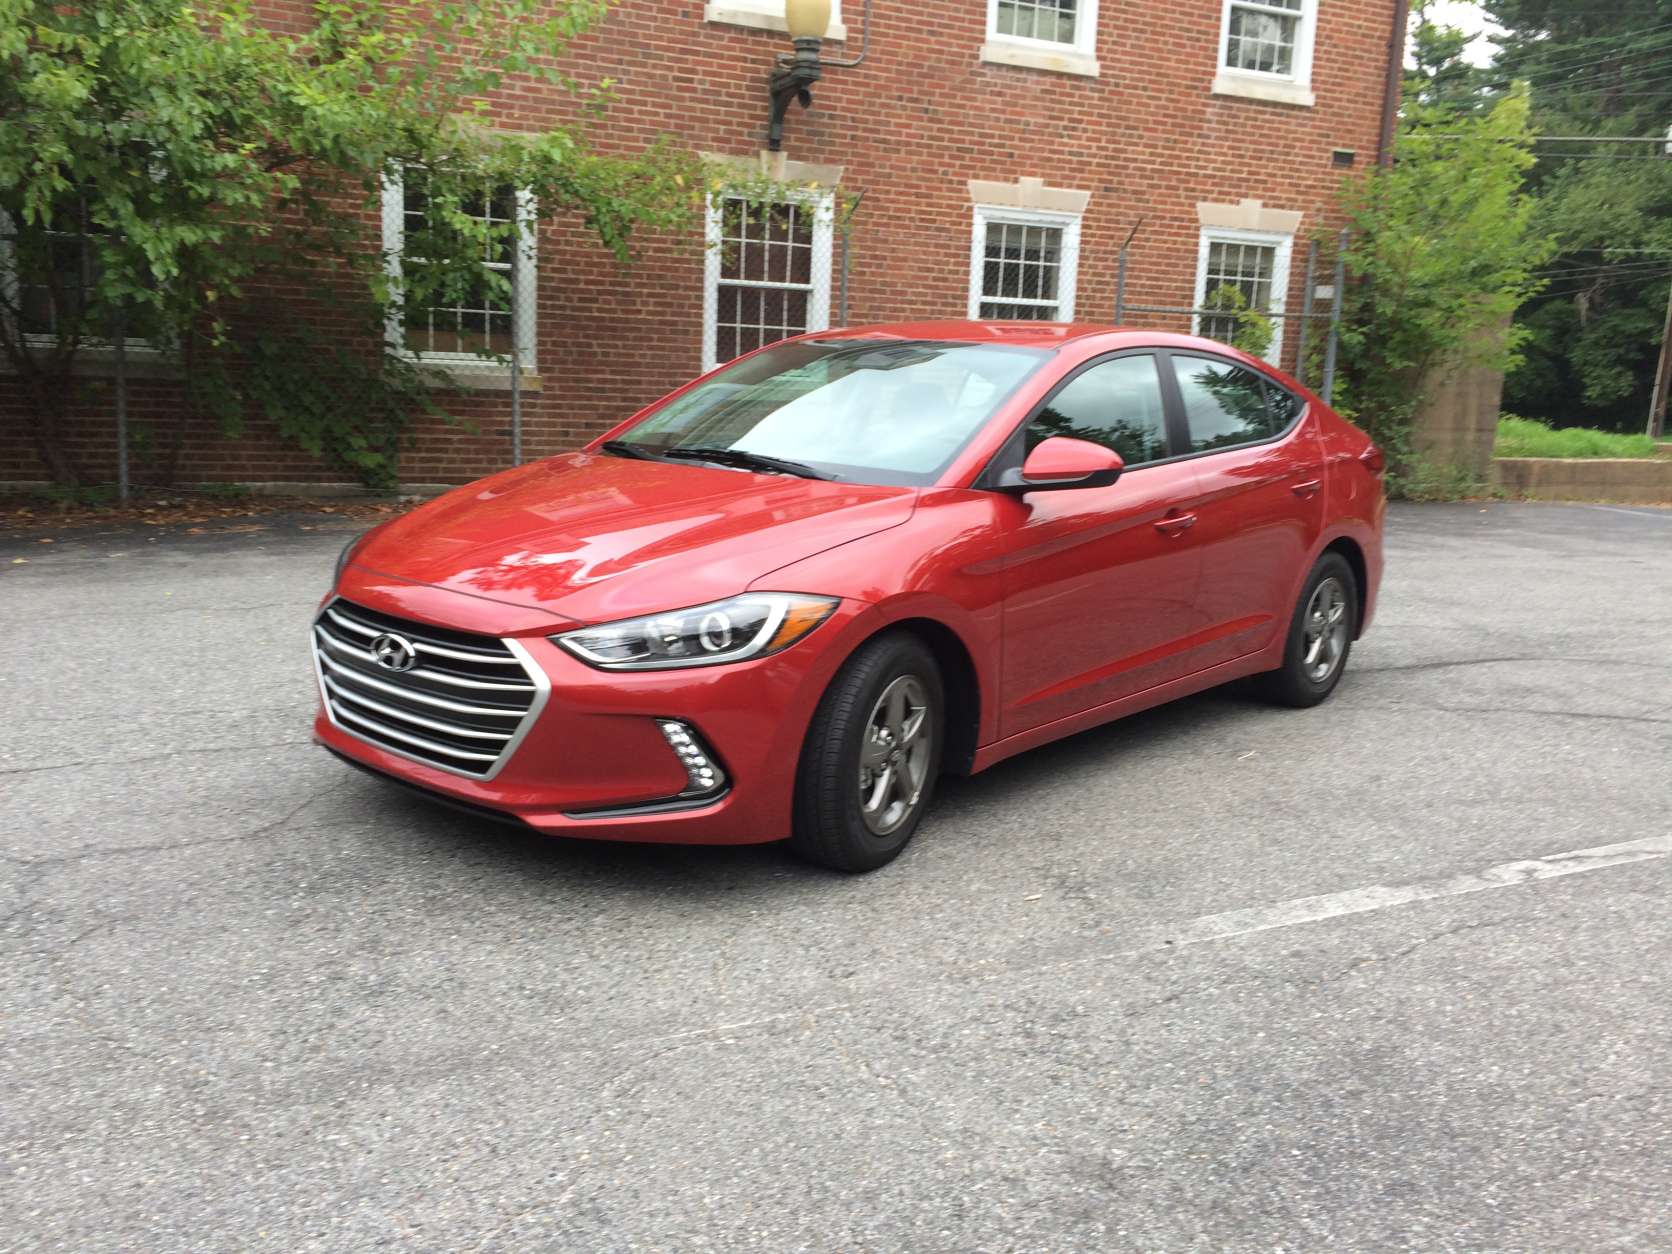 Hyundai's compact sedan, the Elantra, has been redone for 2017 with an emphasis on better fuel economy at a reasonable price. (WTOP/Mike Parris)